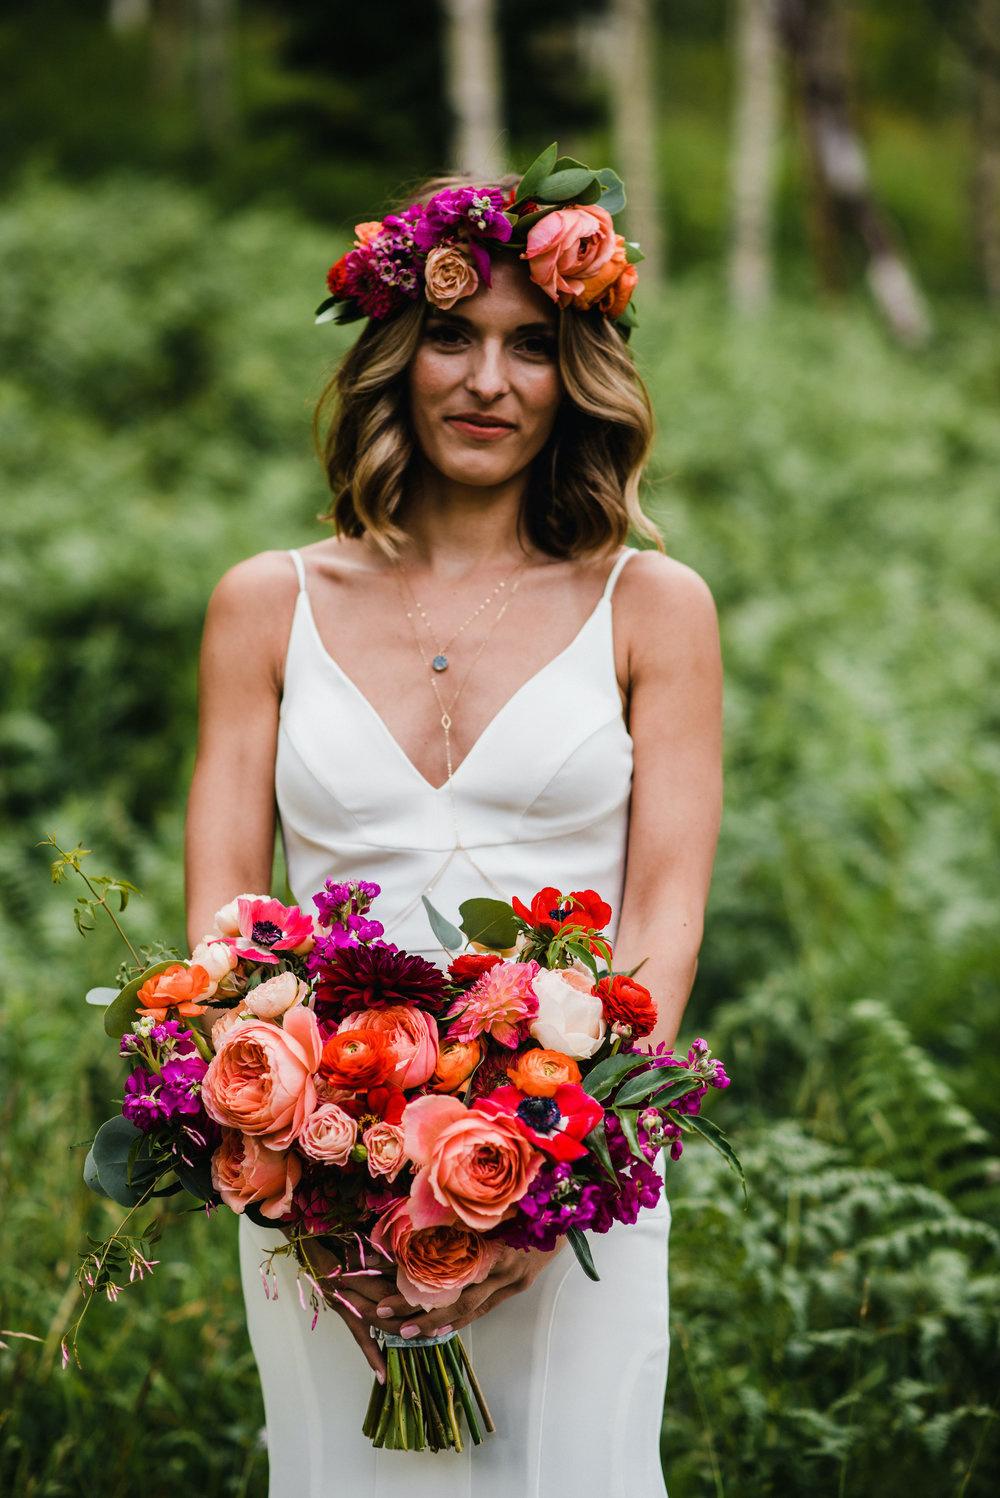 Wedding Bouquet Preservation: How to Preserve Your Wedding Flowers 